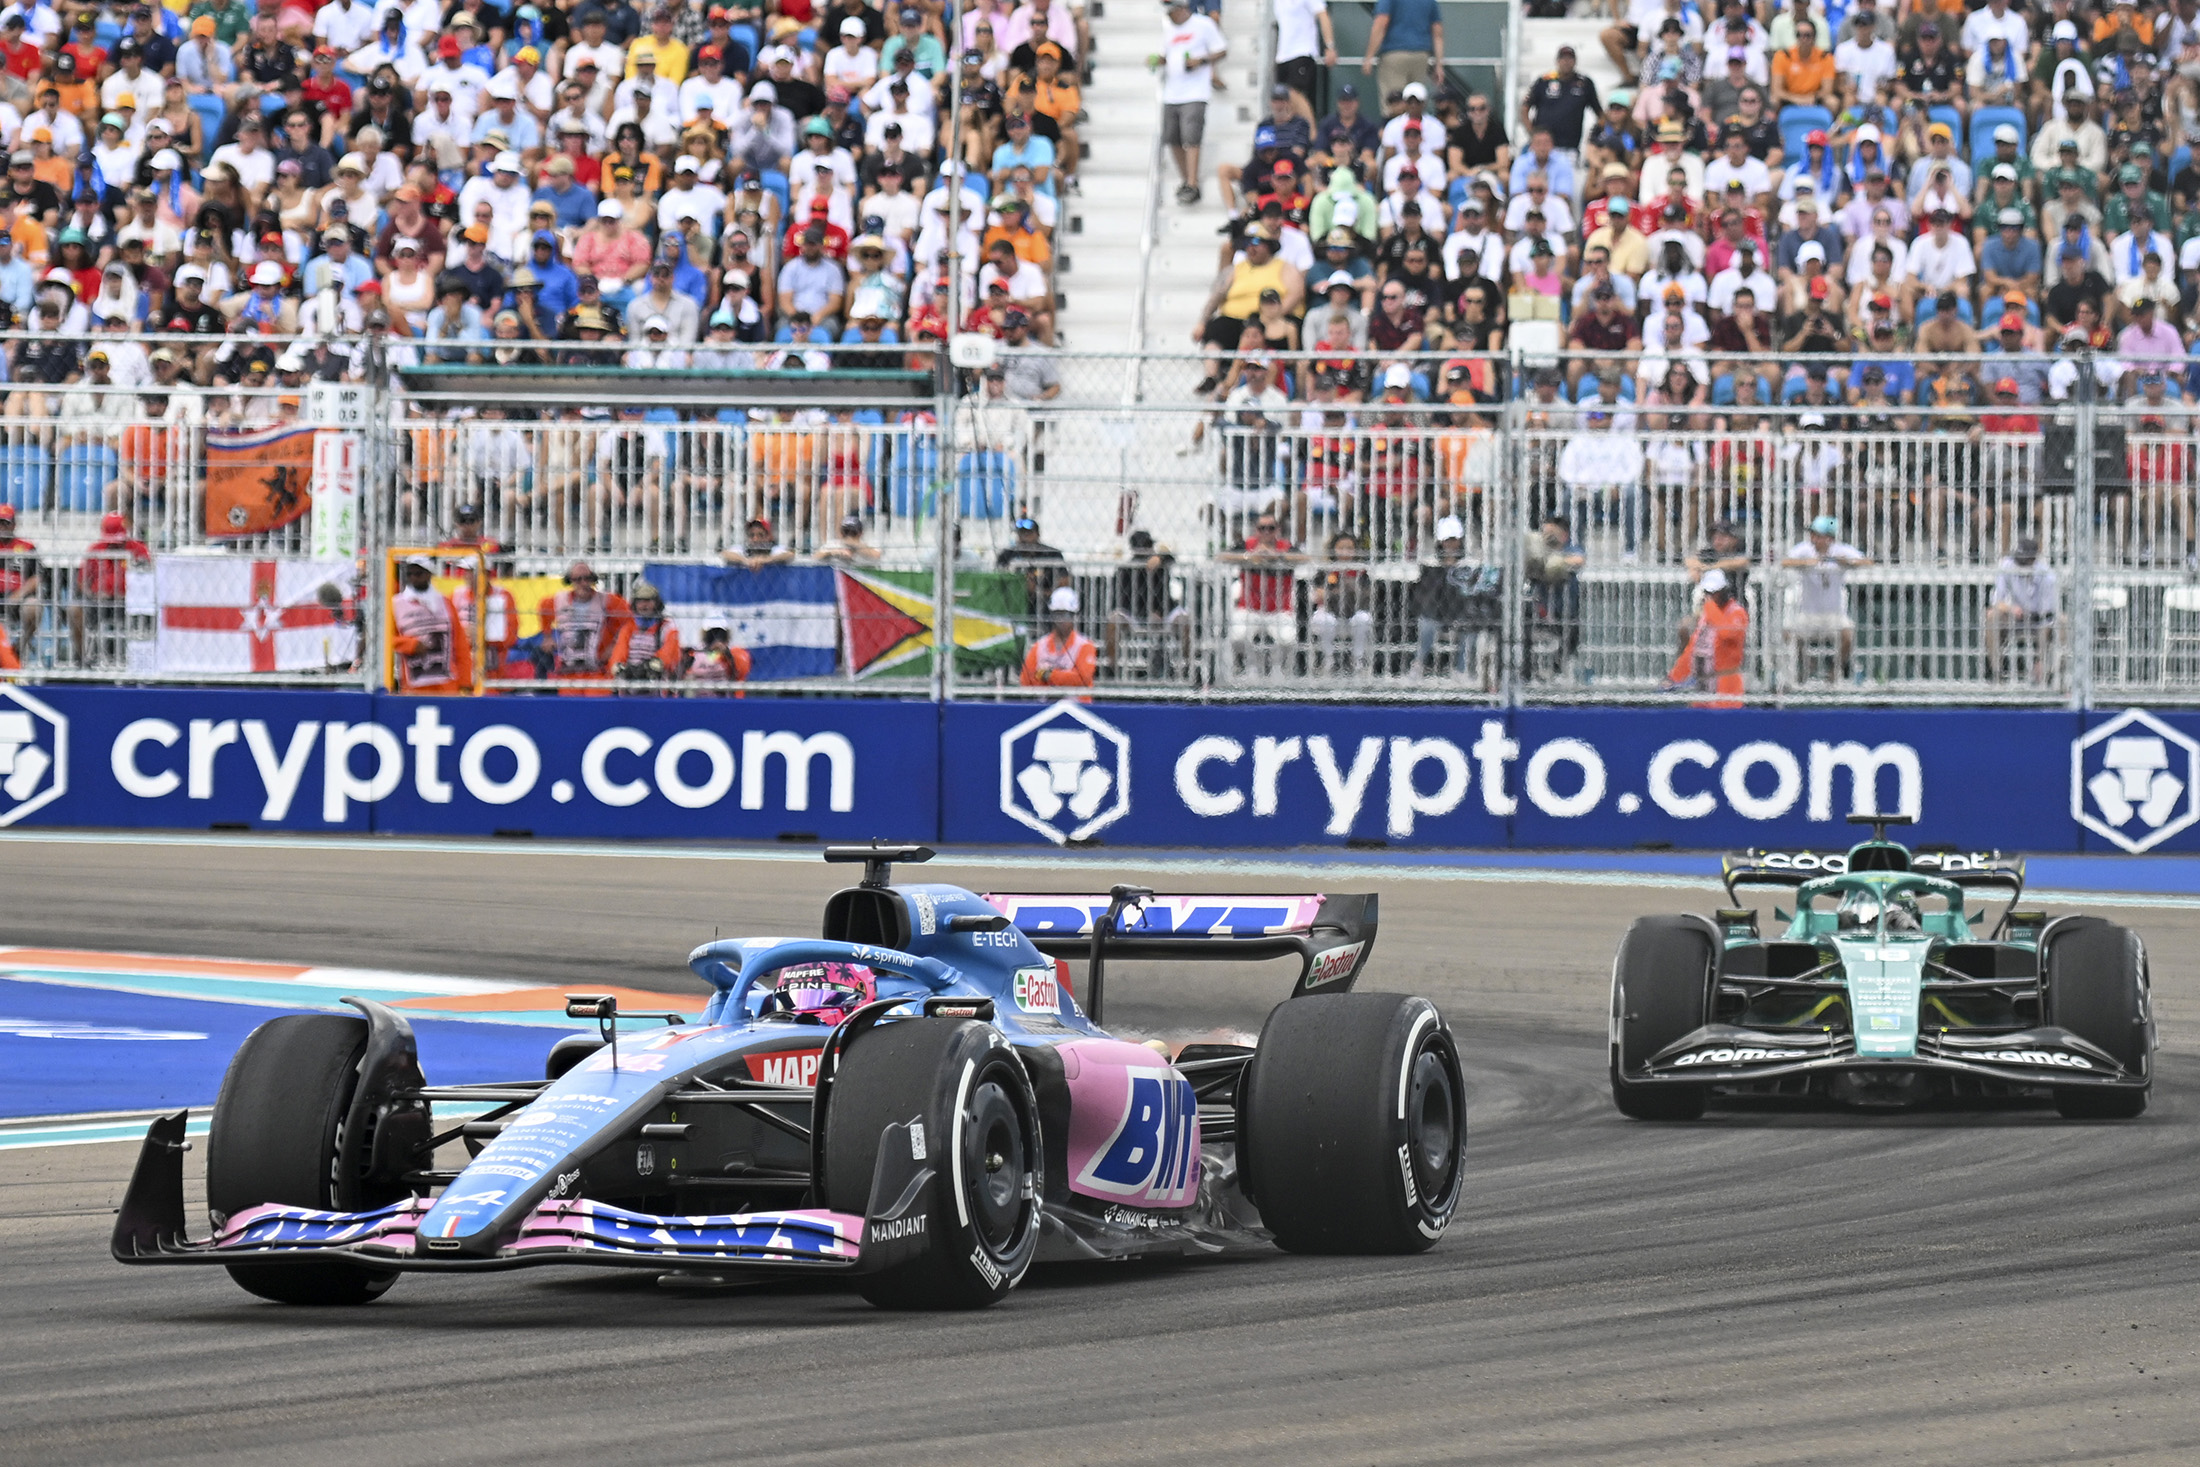 Formula One Sponsorships From Crypto Companies Dwindle With Downturn